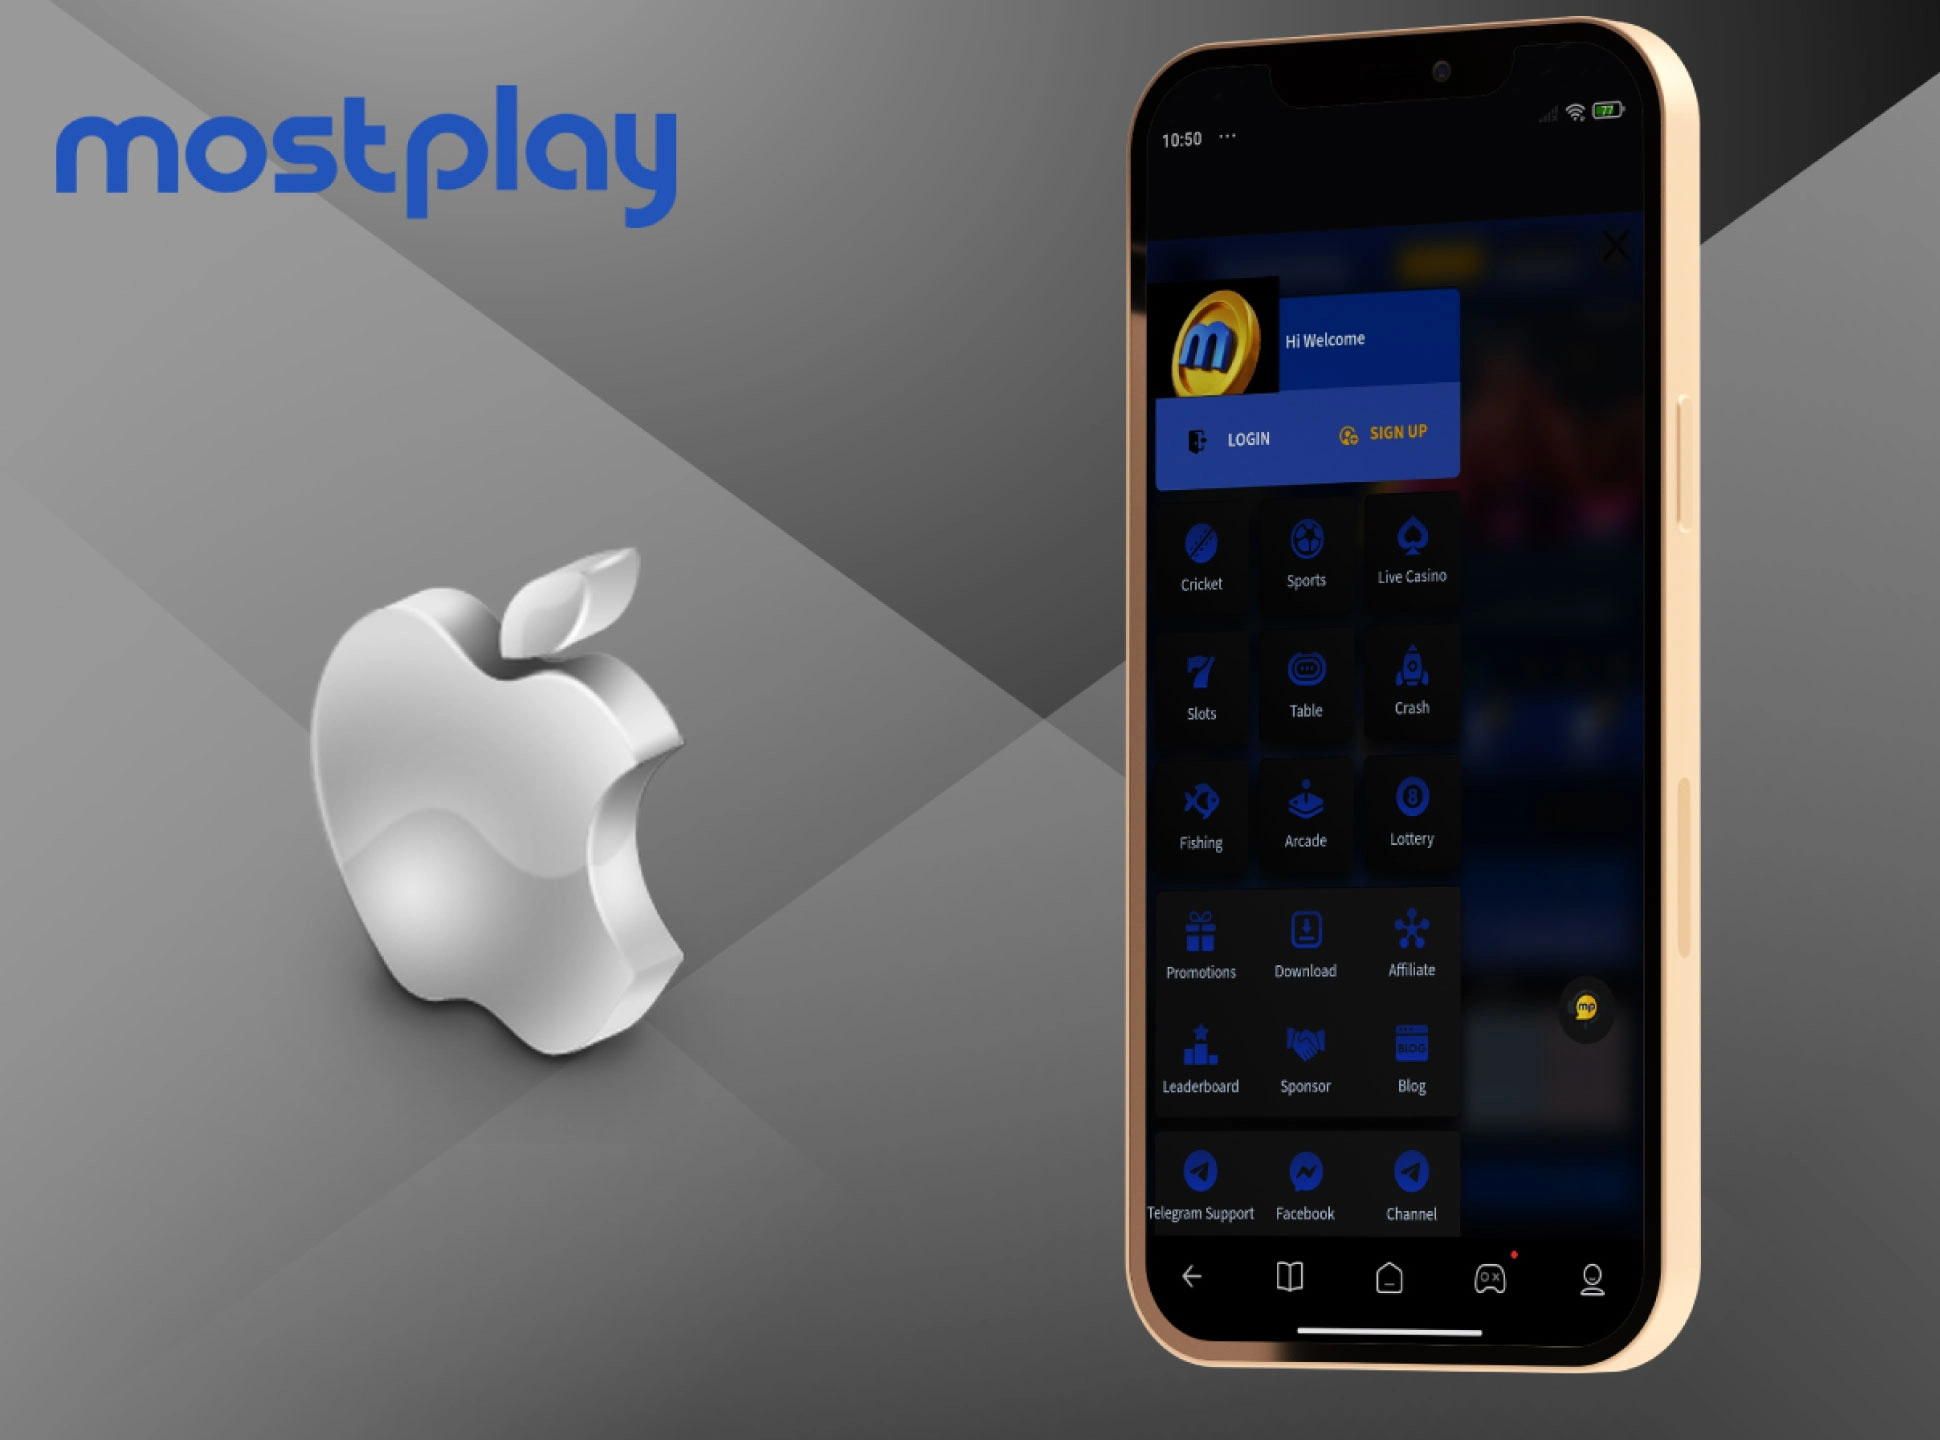 We made sure that the application Mostplay works perfectly on most Apple devices, so we can recommend you to download.